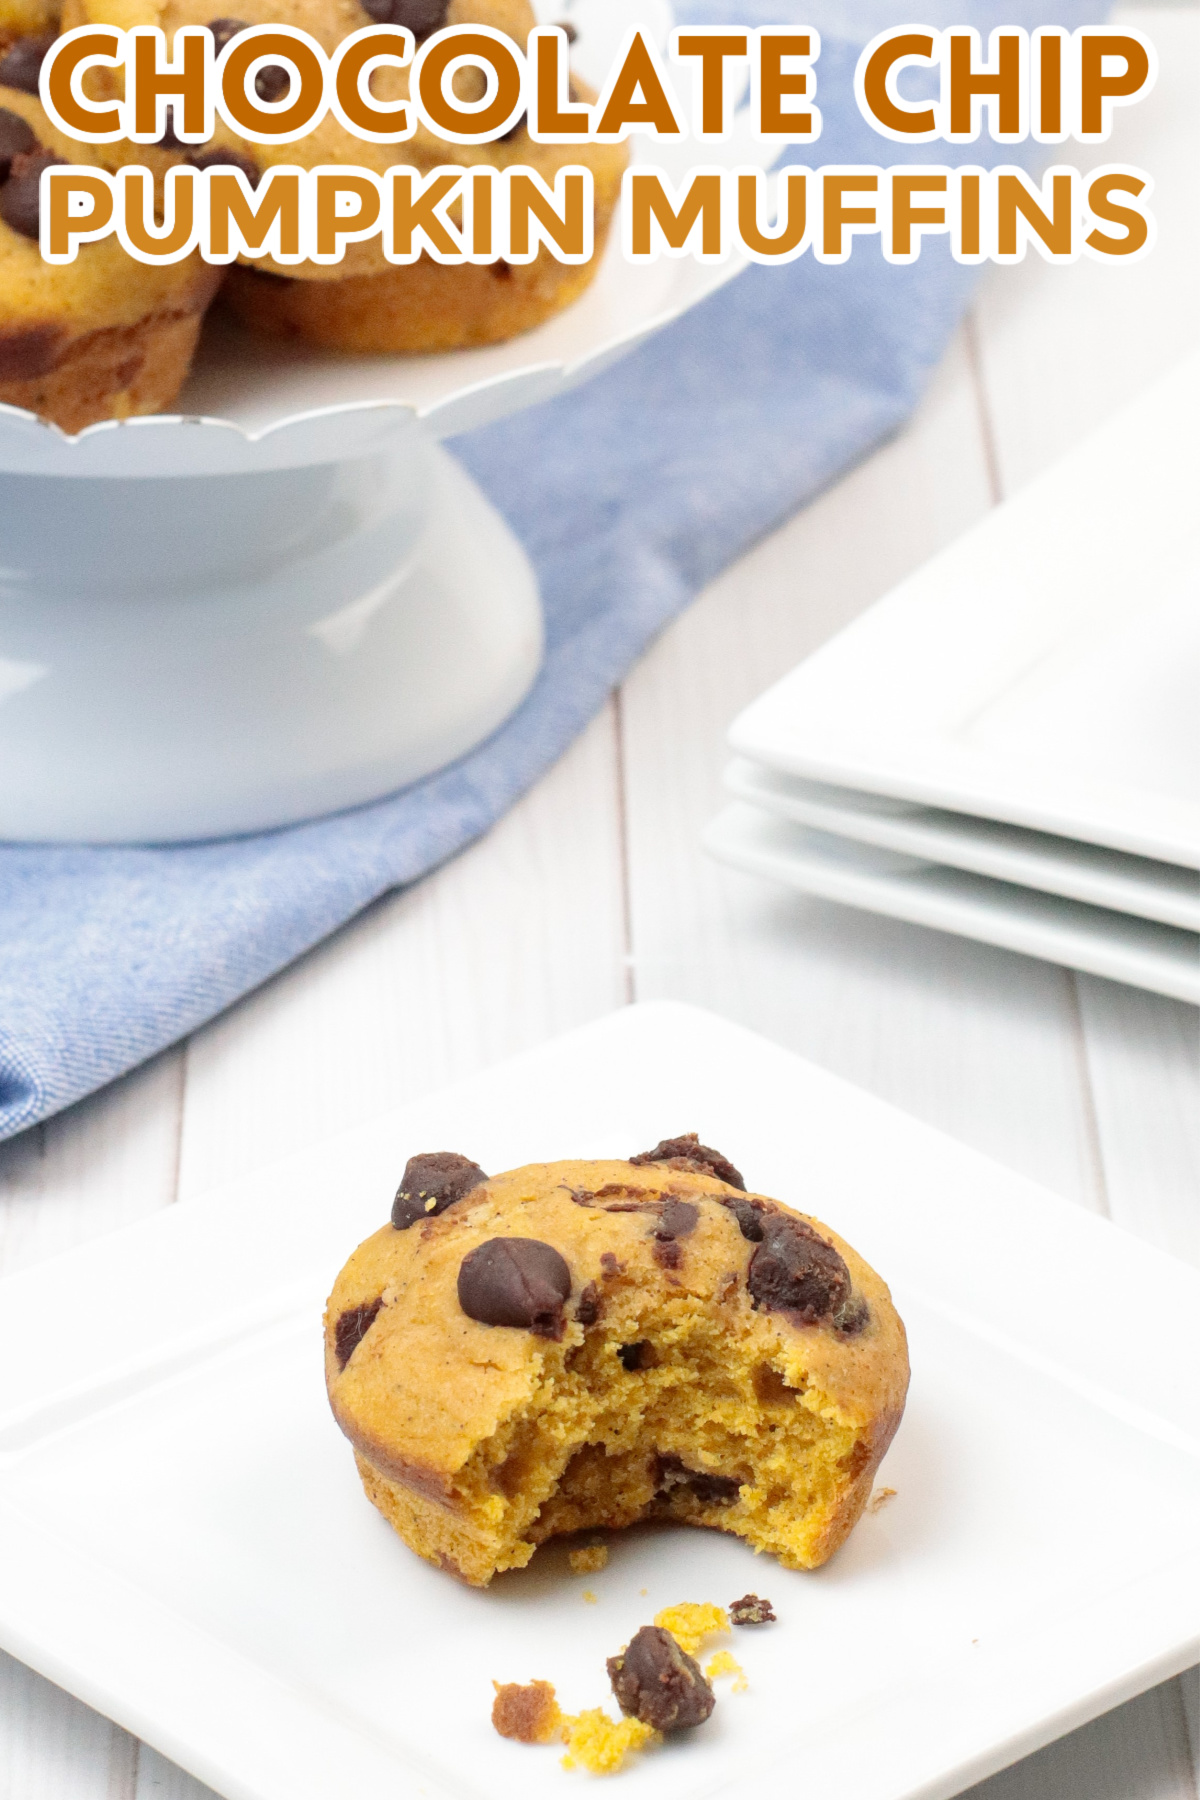 A delicious and easy to follow recipe for moist and fluffy chocolate chip pumpkin muffins - perfect for a quick breakfast or fall snack!